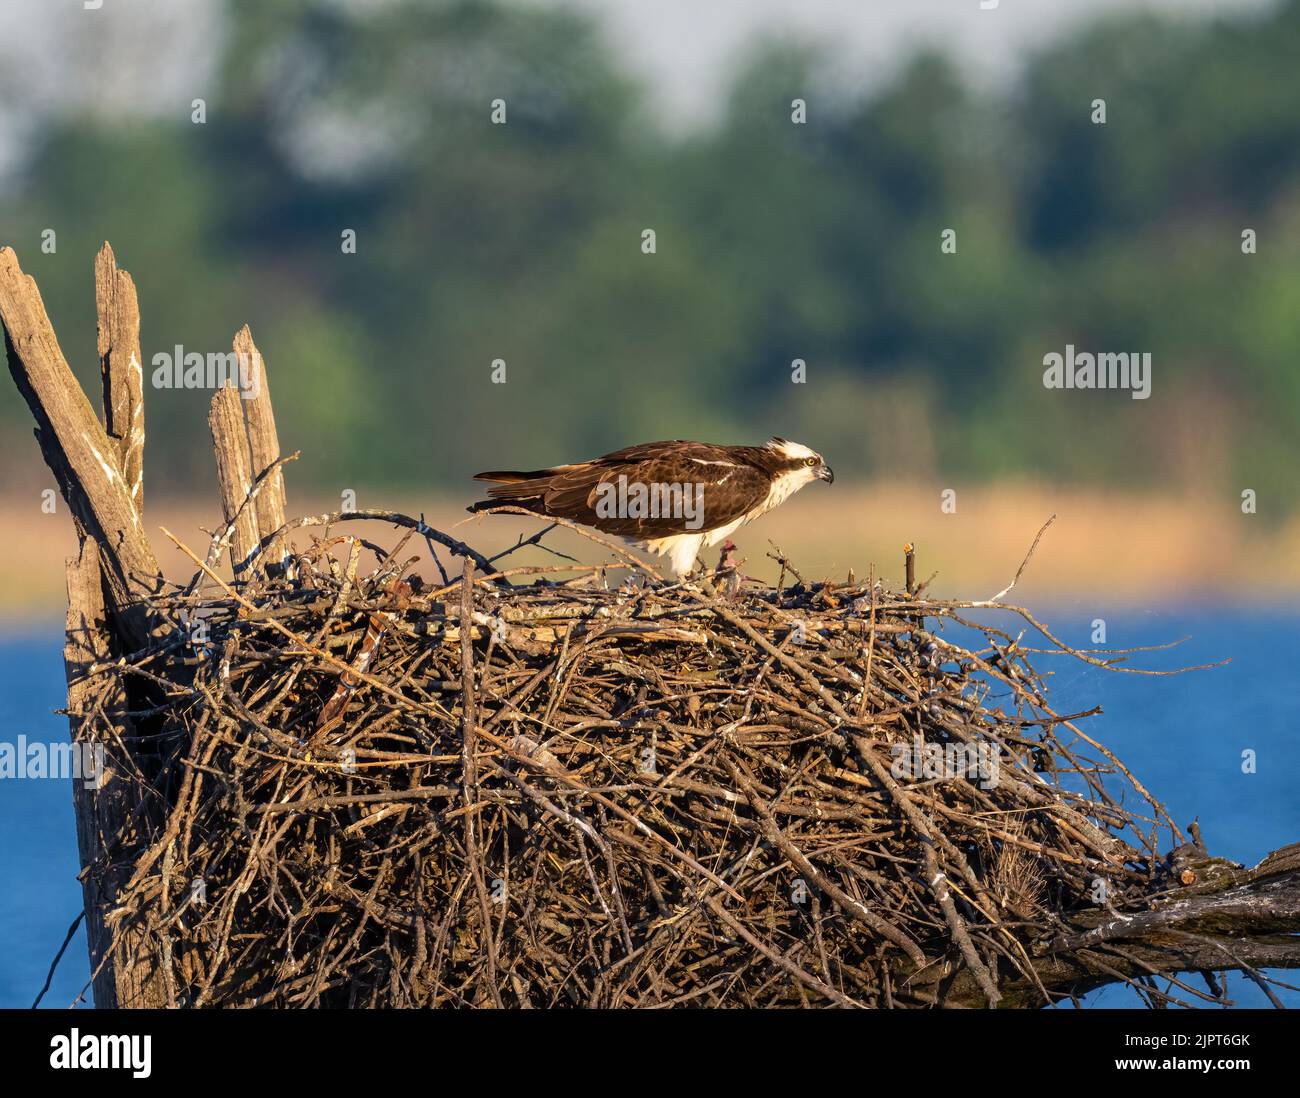 An osprey perched on the nest, against a sea and trees background Stock Photo